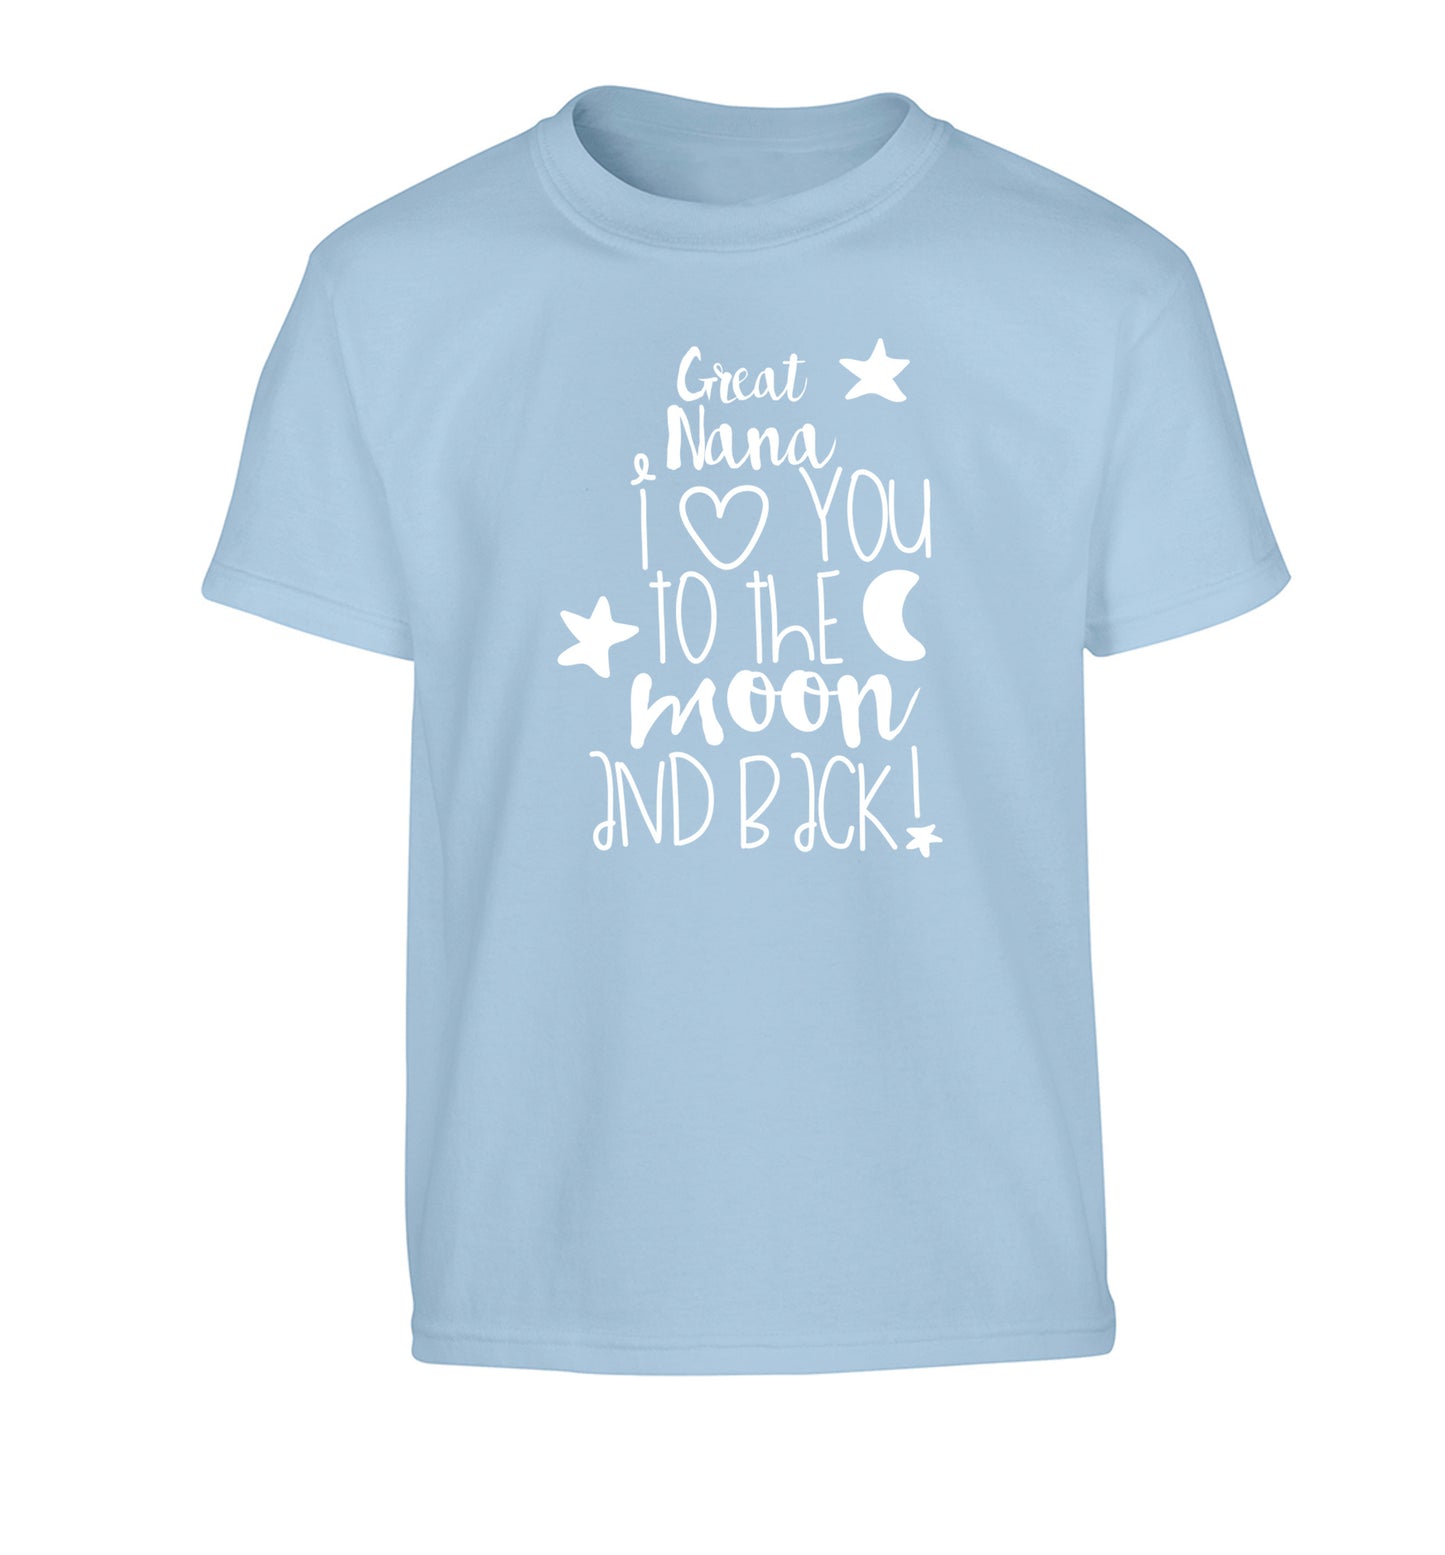 Great Nana I love you to the moon and back Children's light blue Tshirt 12-14 Years